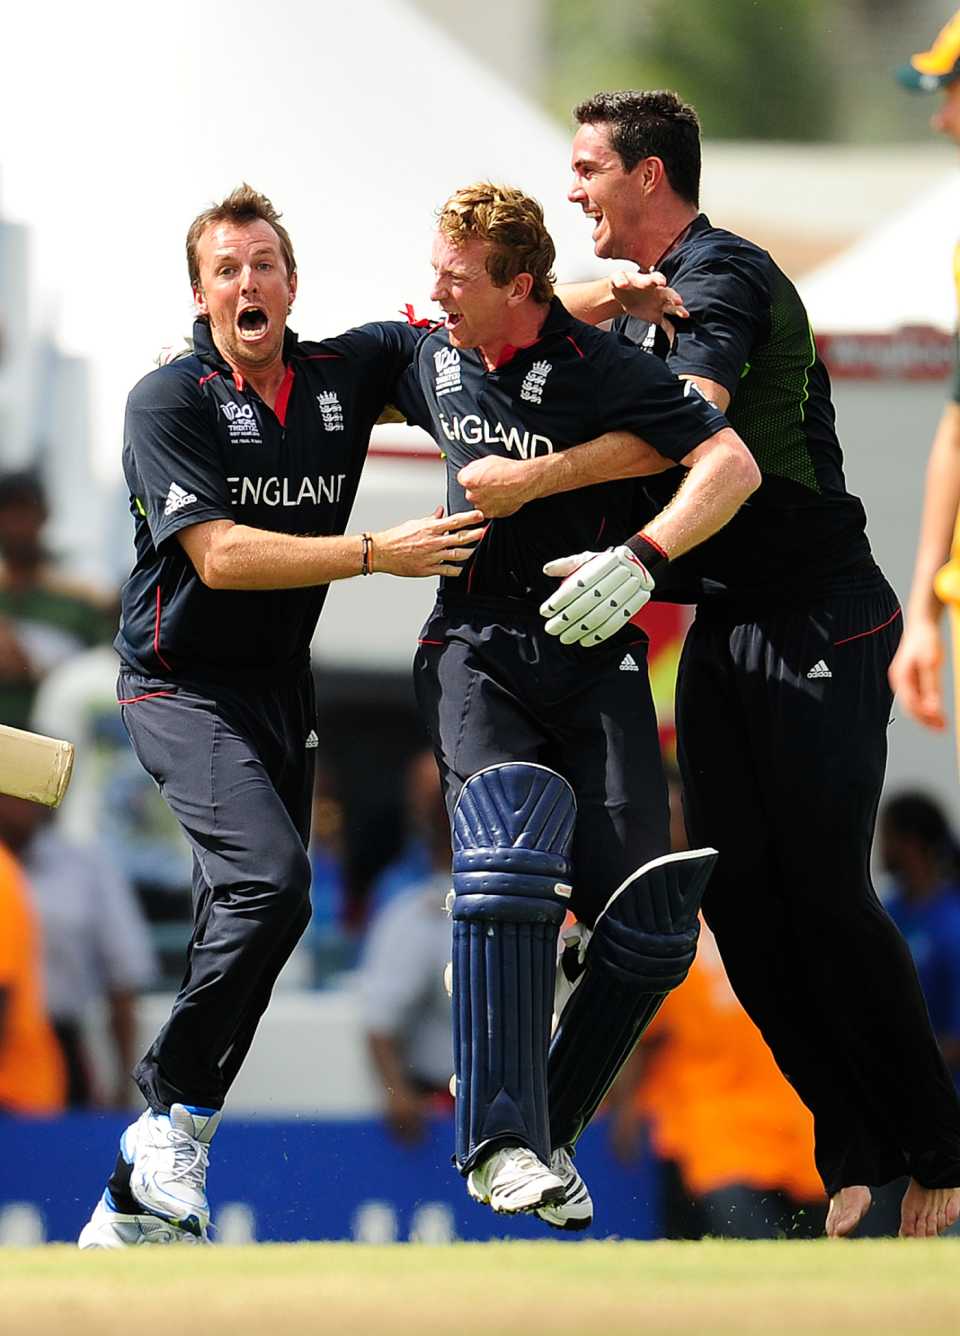 Graeme Swann and Kevin Pietersen mob Paul Collingwood after England's World T20 victory in 2010, Barbados, May 16, 2010